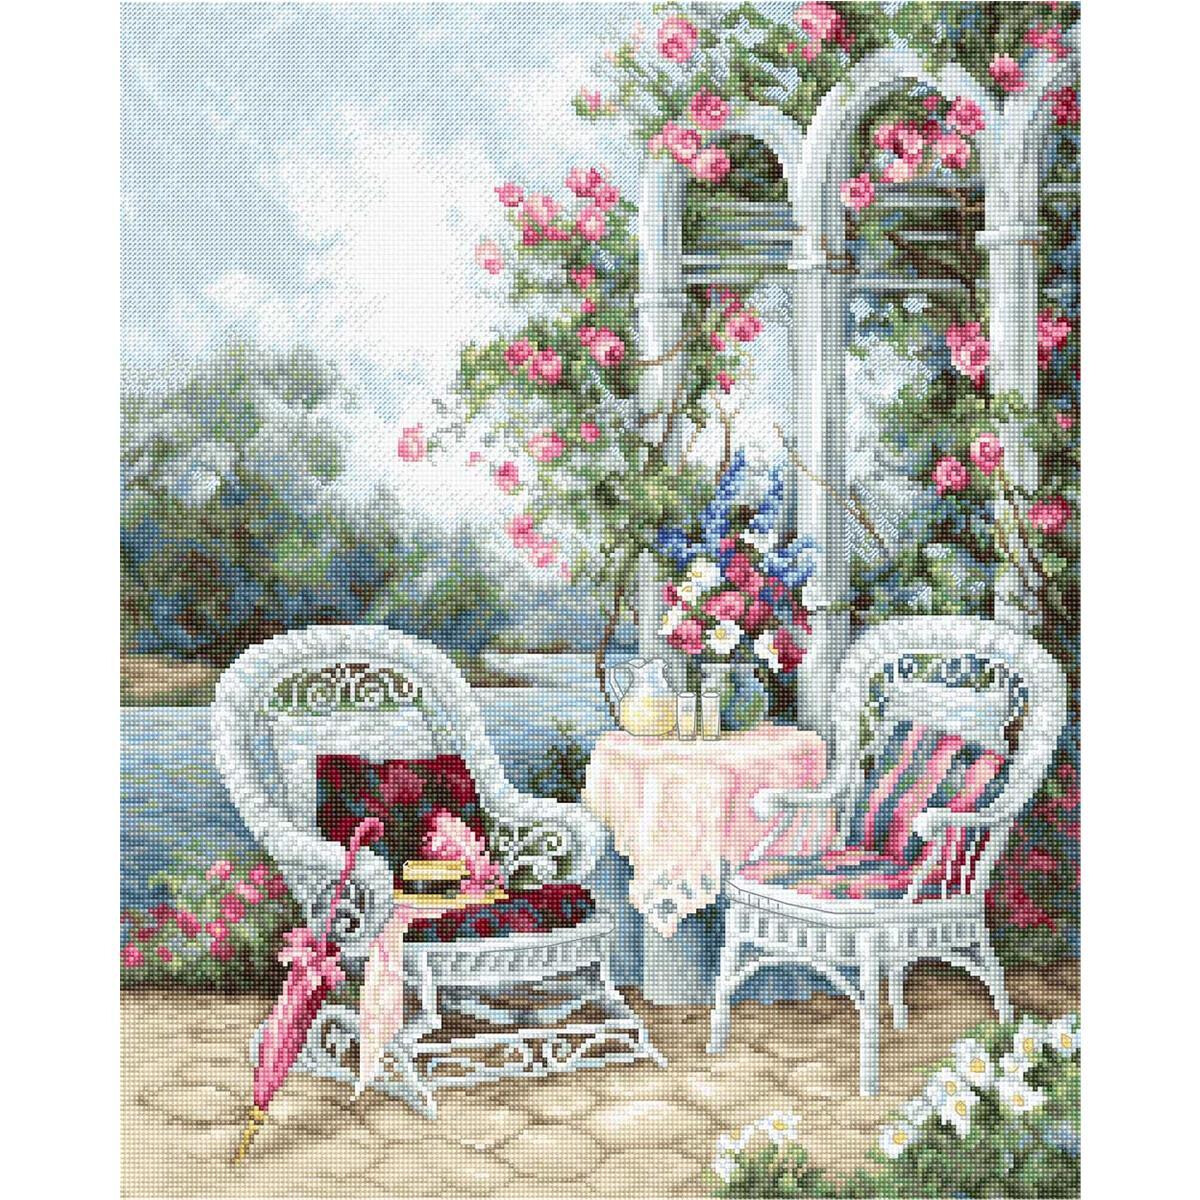 A tranquil outdoor scene with two white wicker chairs...